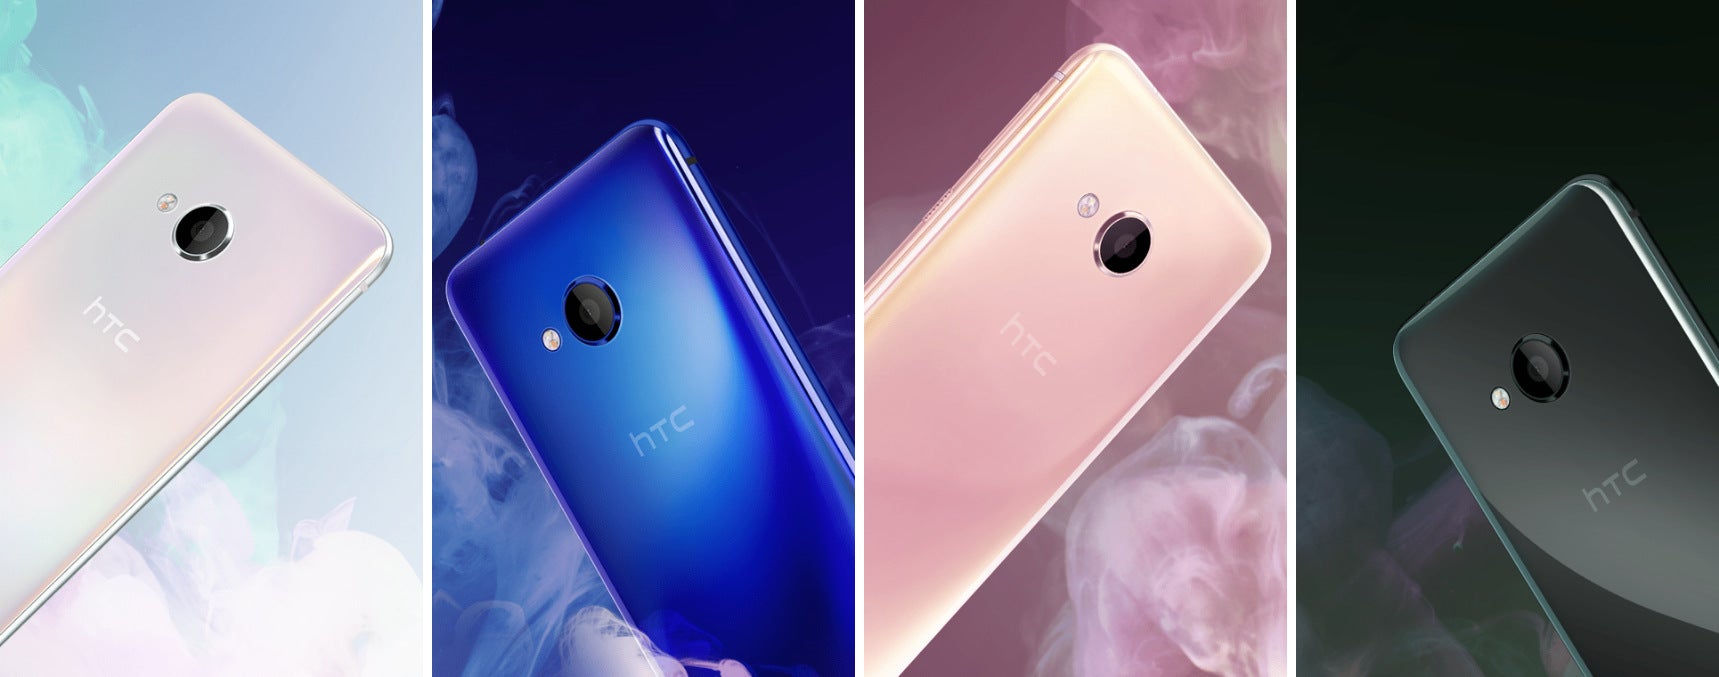 The HTC U Play is pretty, don't you think? - HTC U Ultra vs HTC U Play: what are the differences, and what do they have in common?